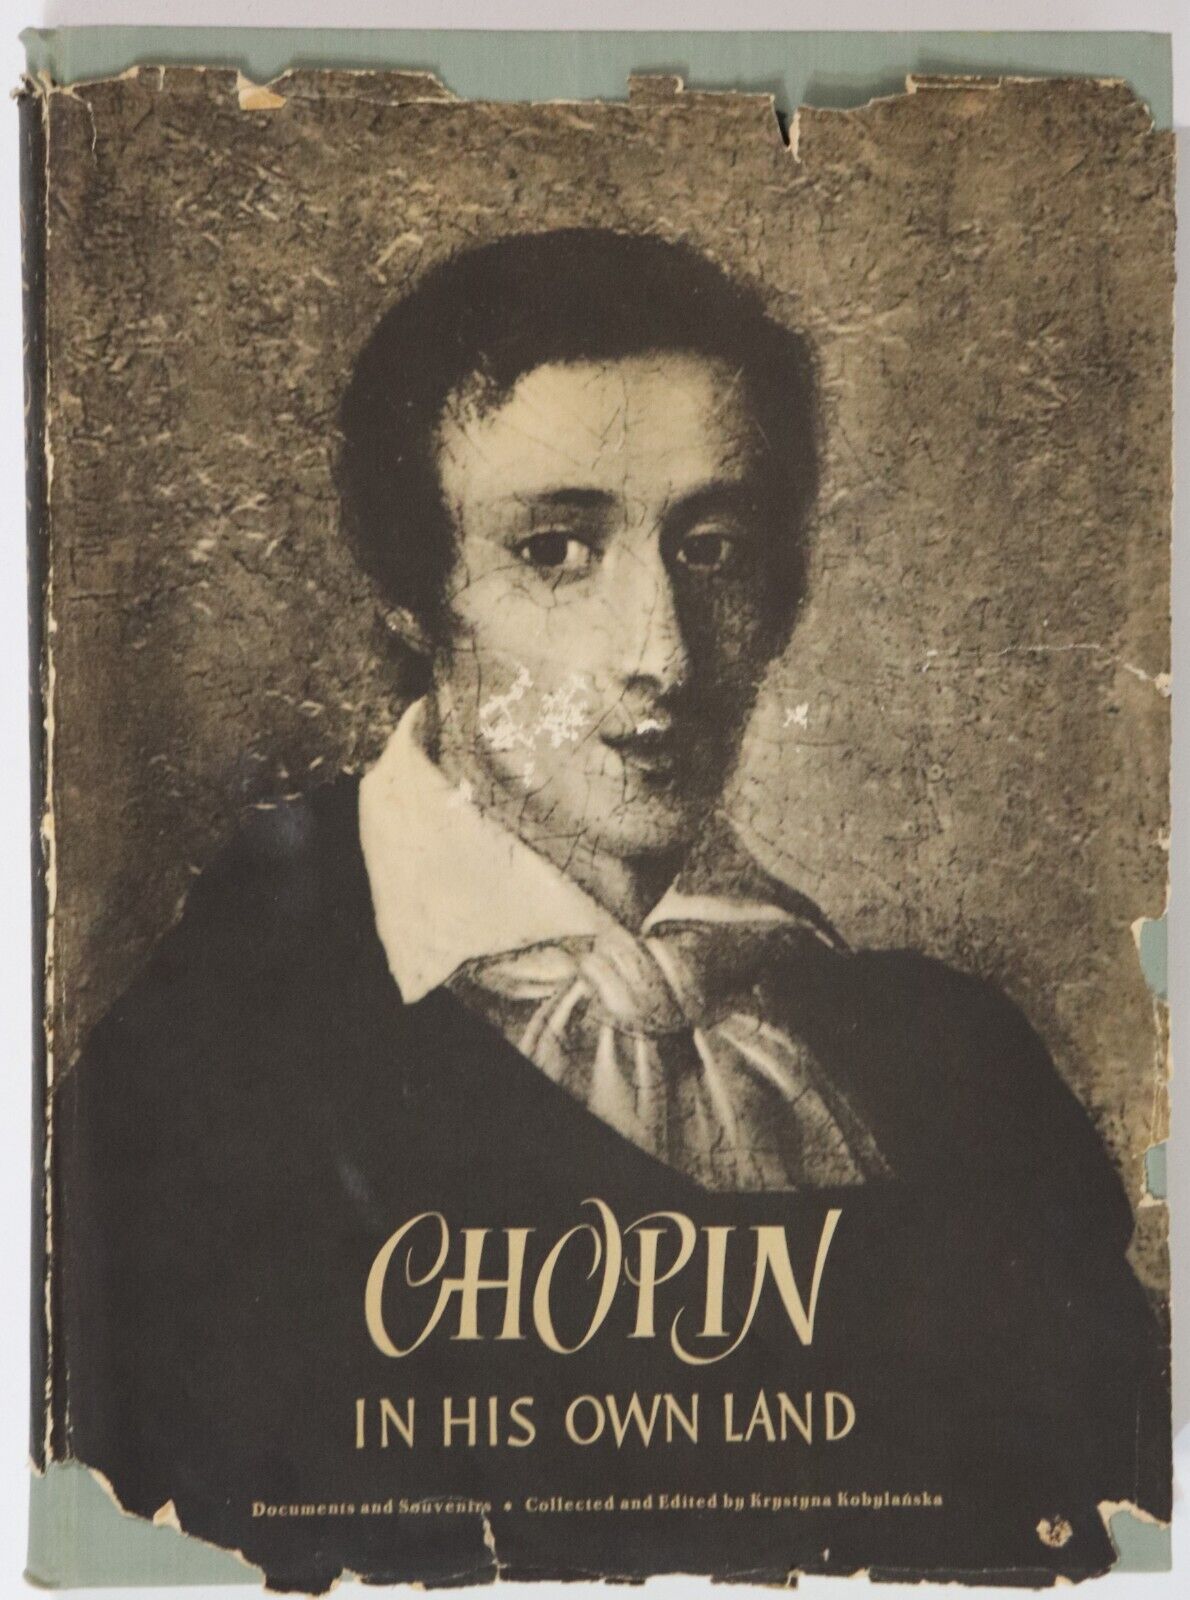 Chopin In His Own Land by K. Koblyanska - 1955 - Classical Music History Book